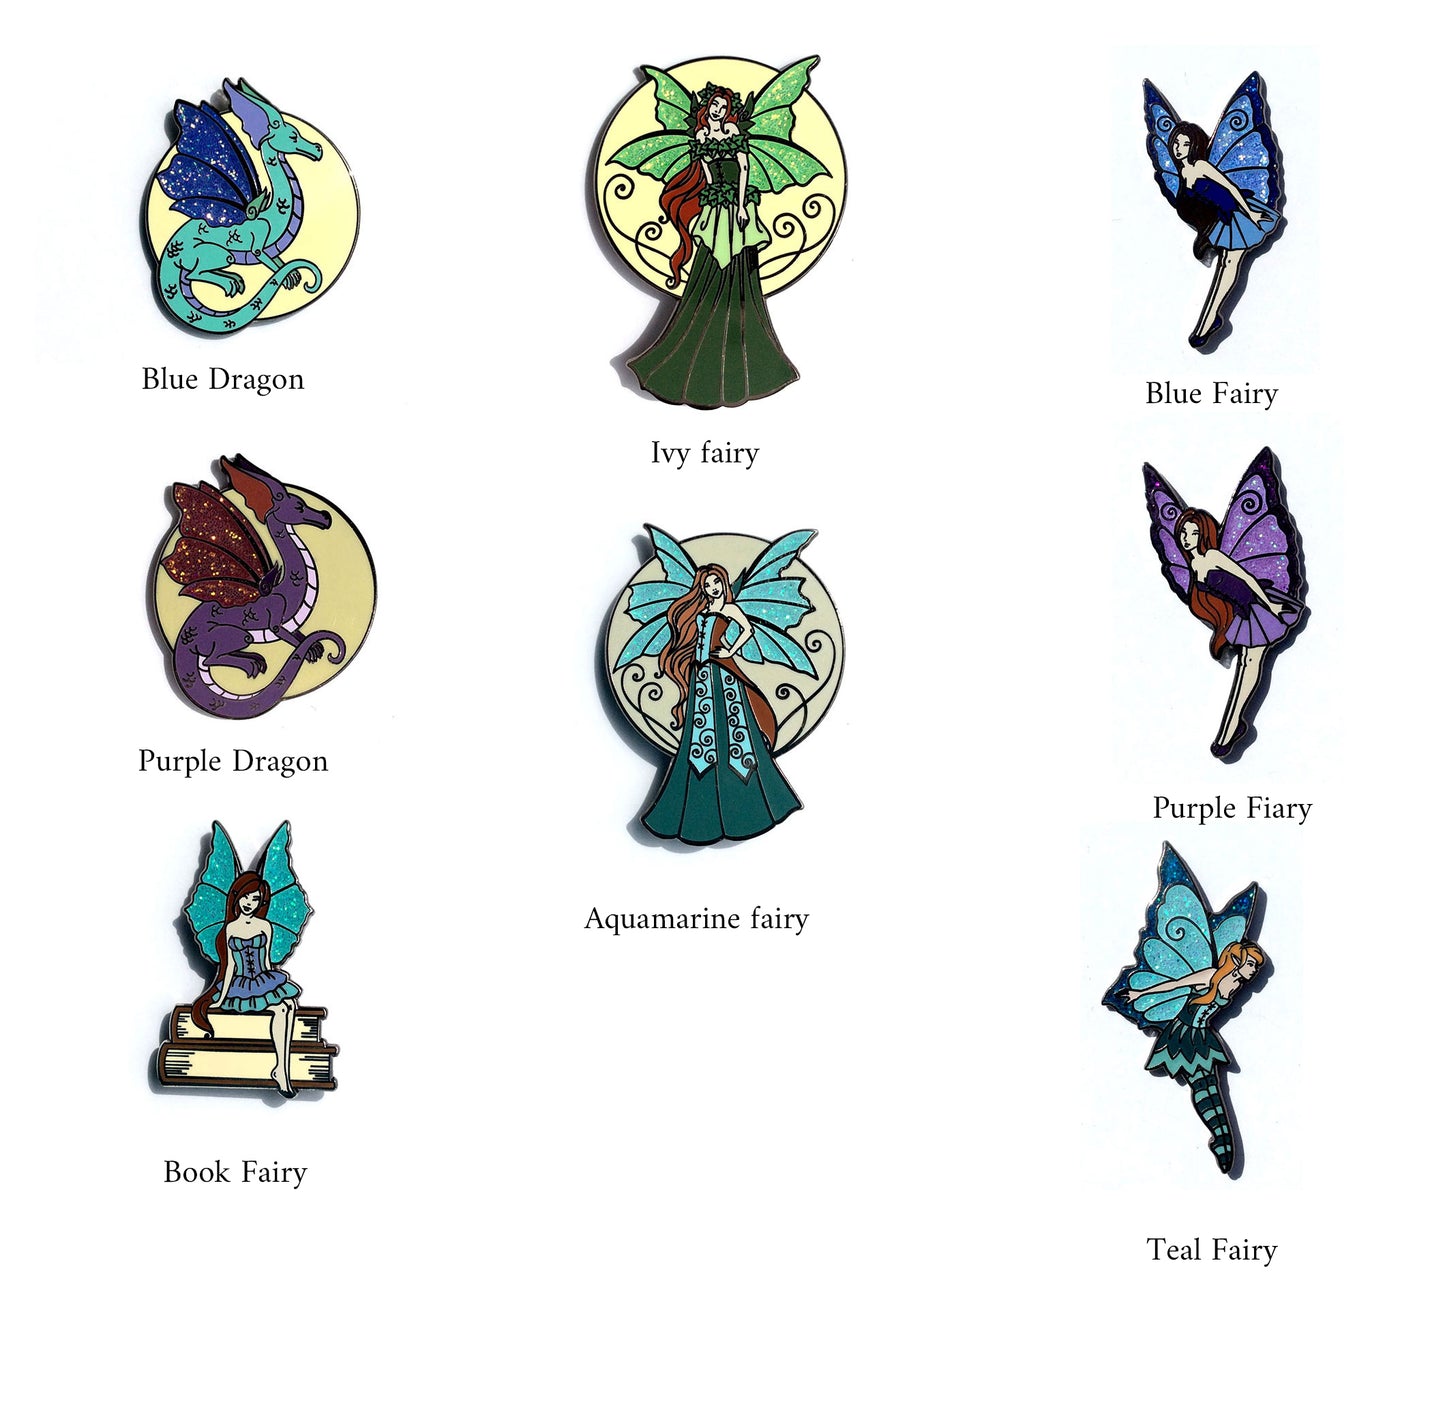 Teal Fairy by Amy Brown, Pin